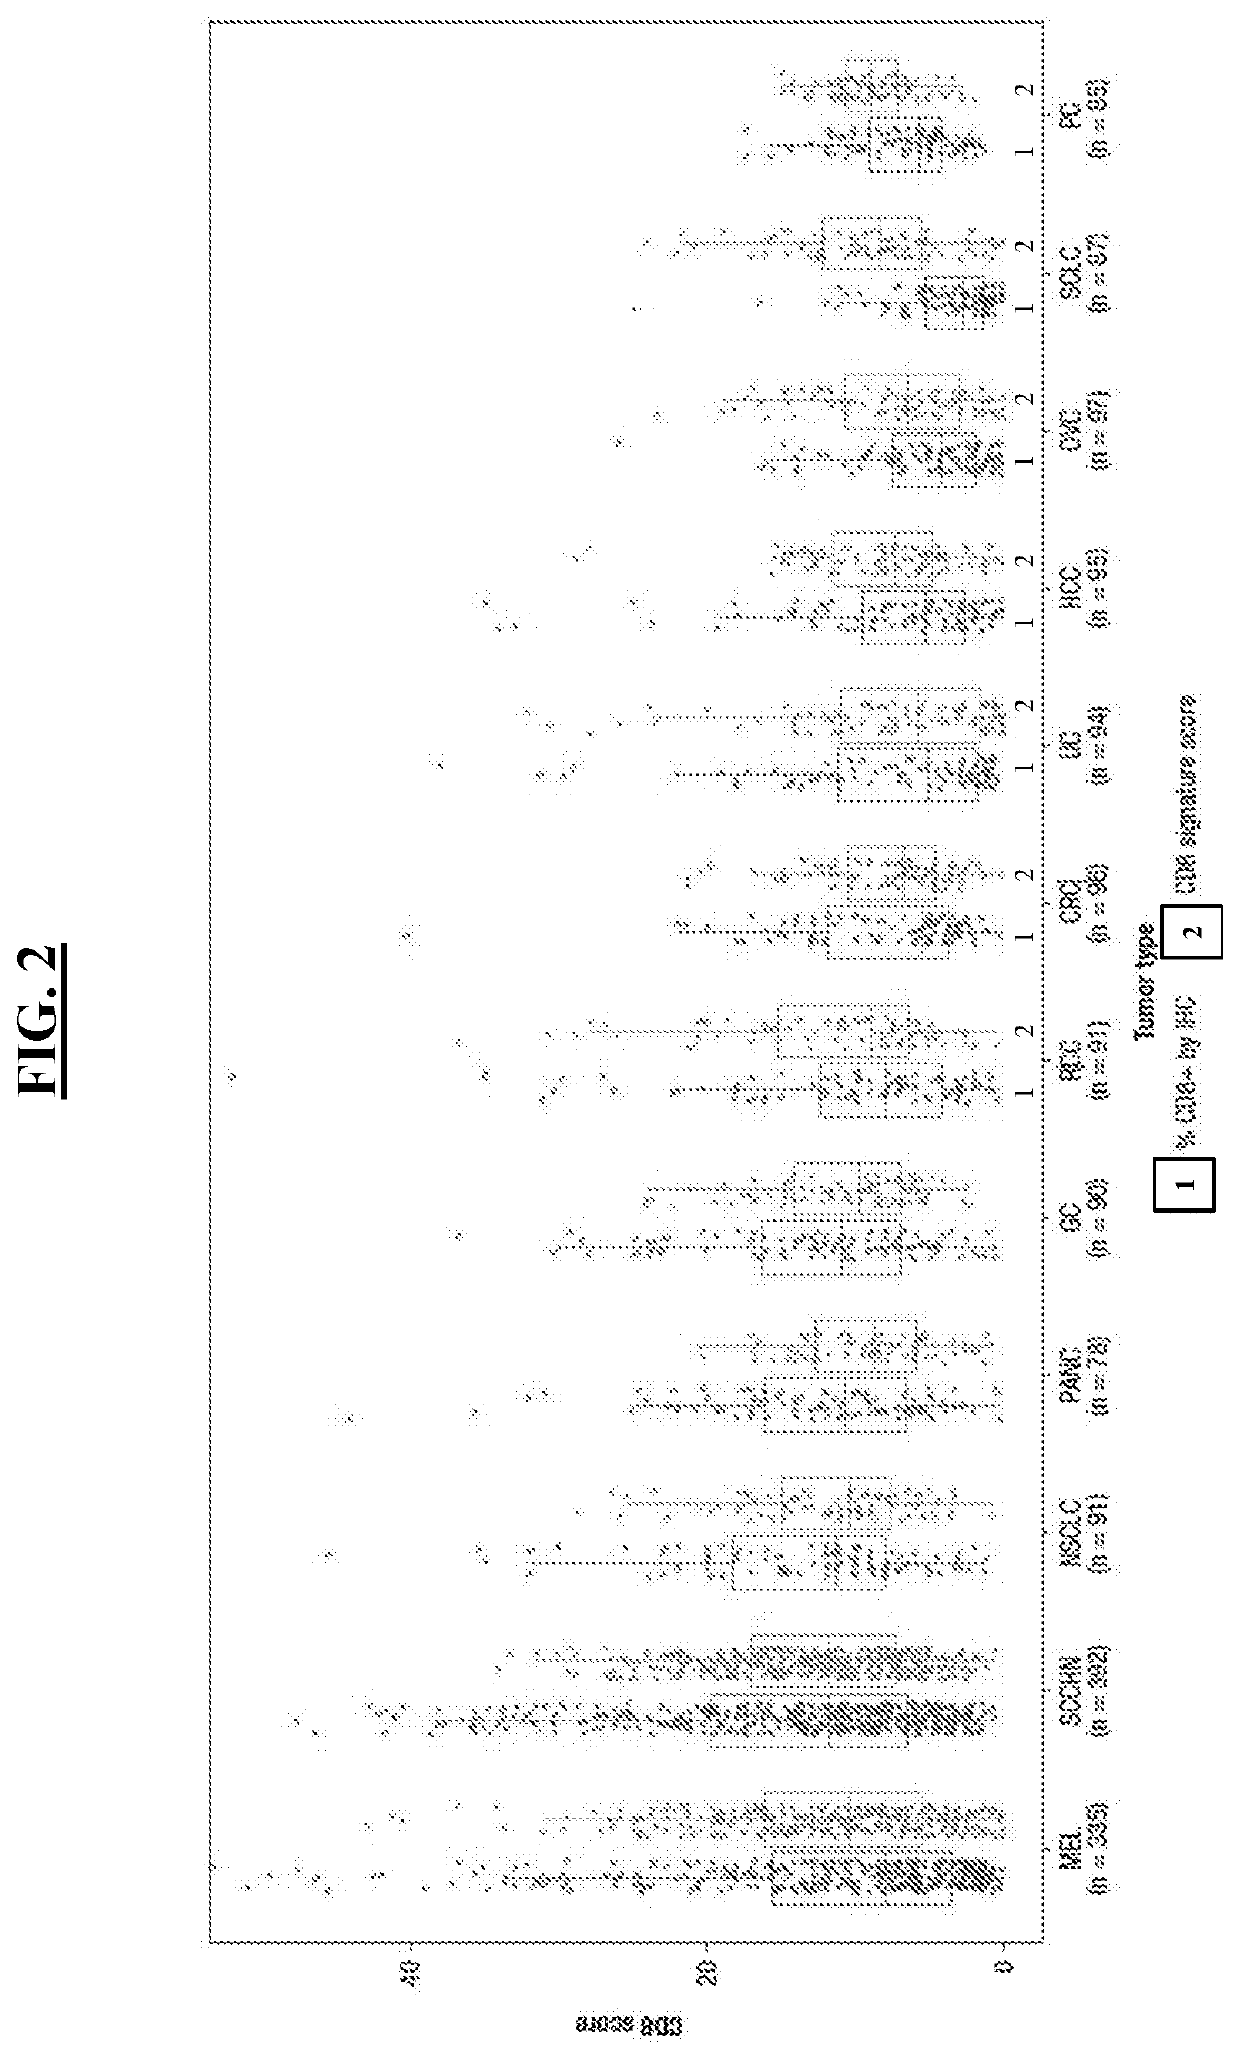 Multi-tumor gene signature for suitability to immuno-oncology therapy